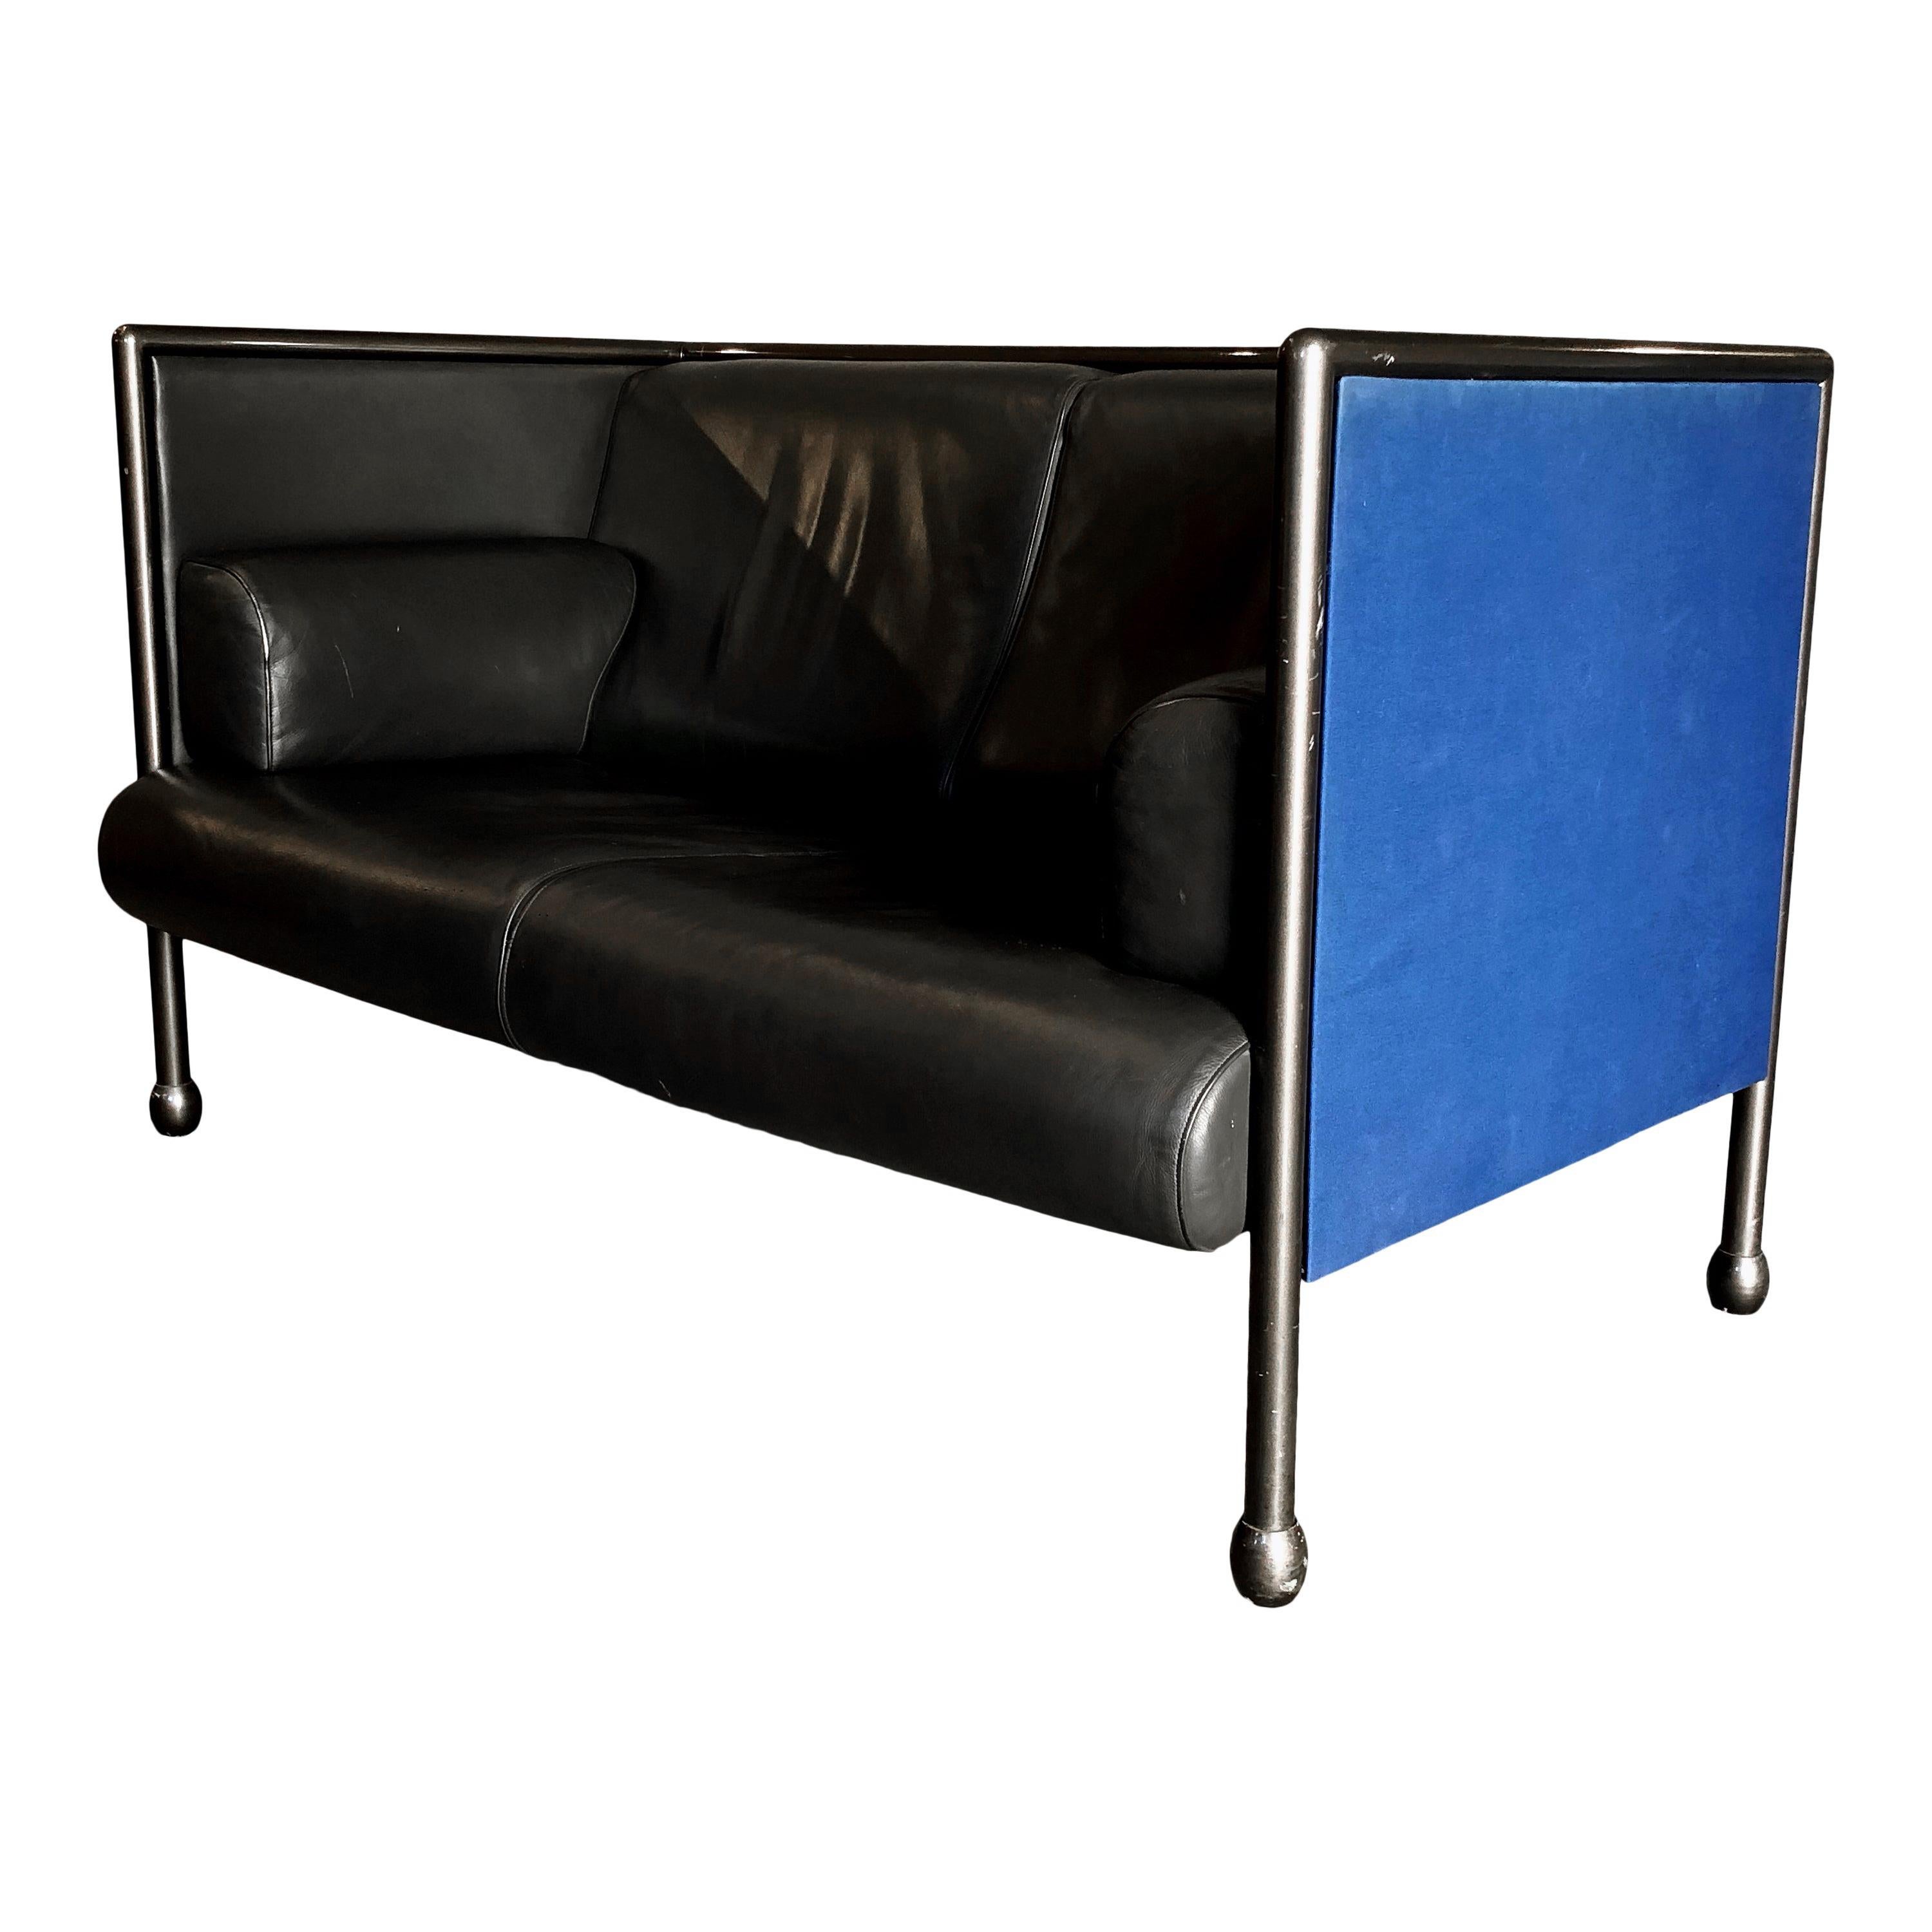 Ettore Sottsass Postmodern Iron and Black Leather Danube Sofa for Cassina, 1992 For Sale